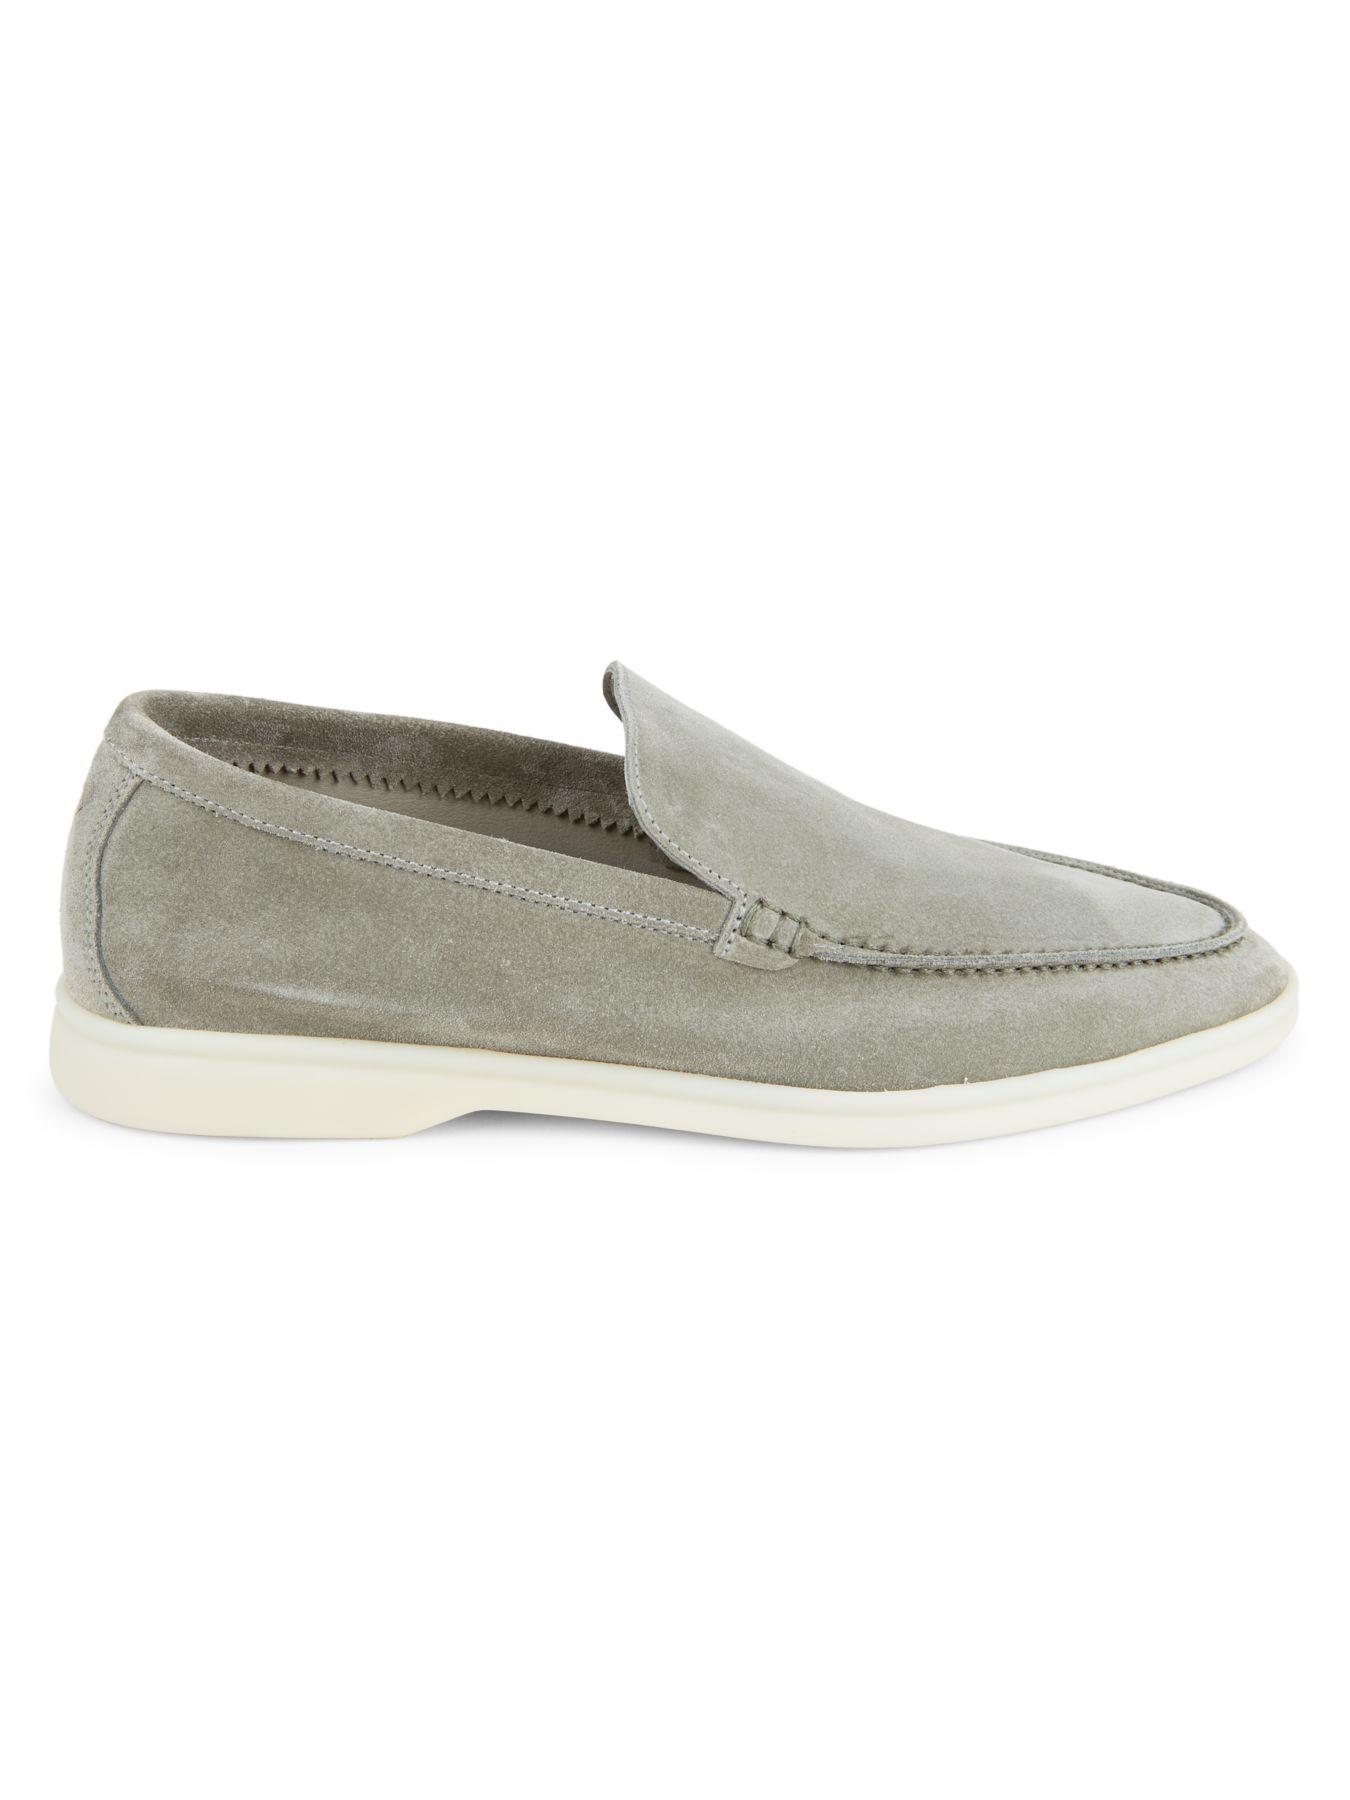 Loro Piana Summer Walk Suede Loafers in Grey (Gray) for Men - Lyst